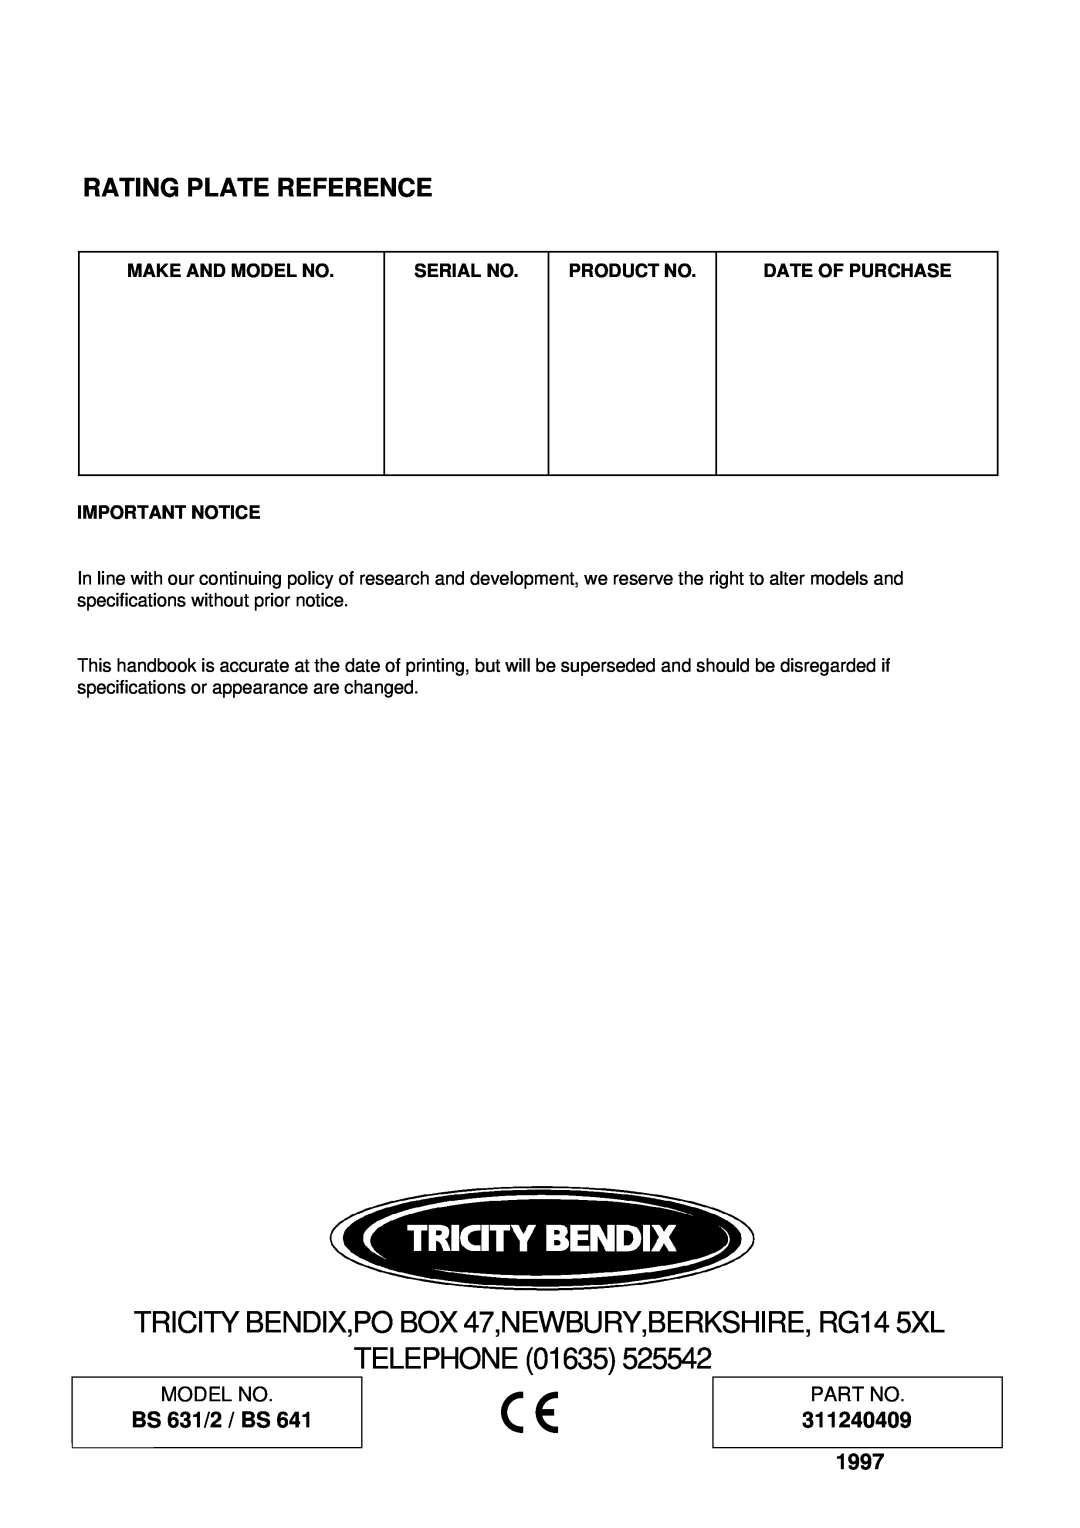 Tricity Bendix Rating Plate Reference, 311240409, Telephone, BS 631/2 / BS, Make And Model No, Serial No 